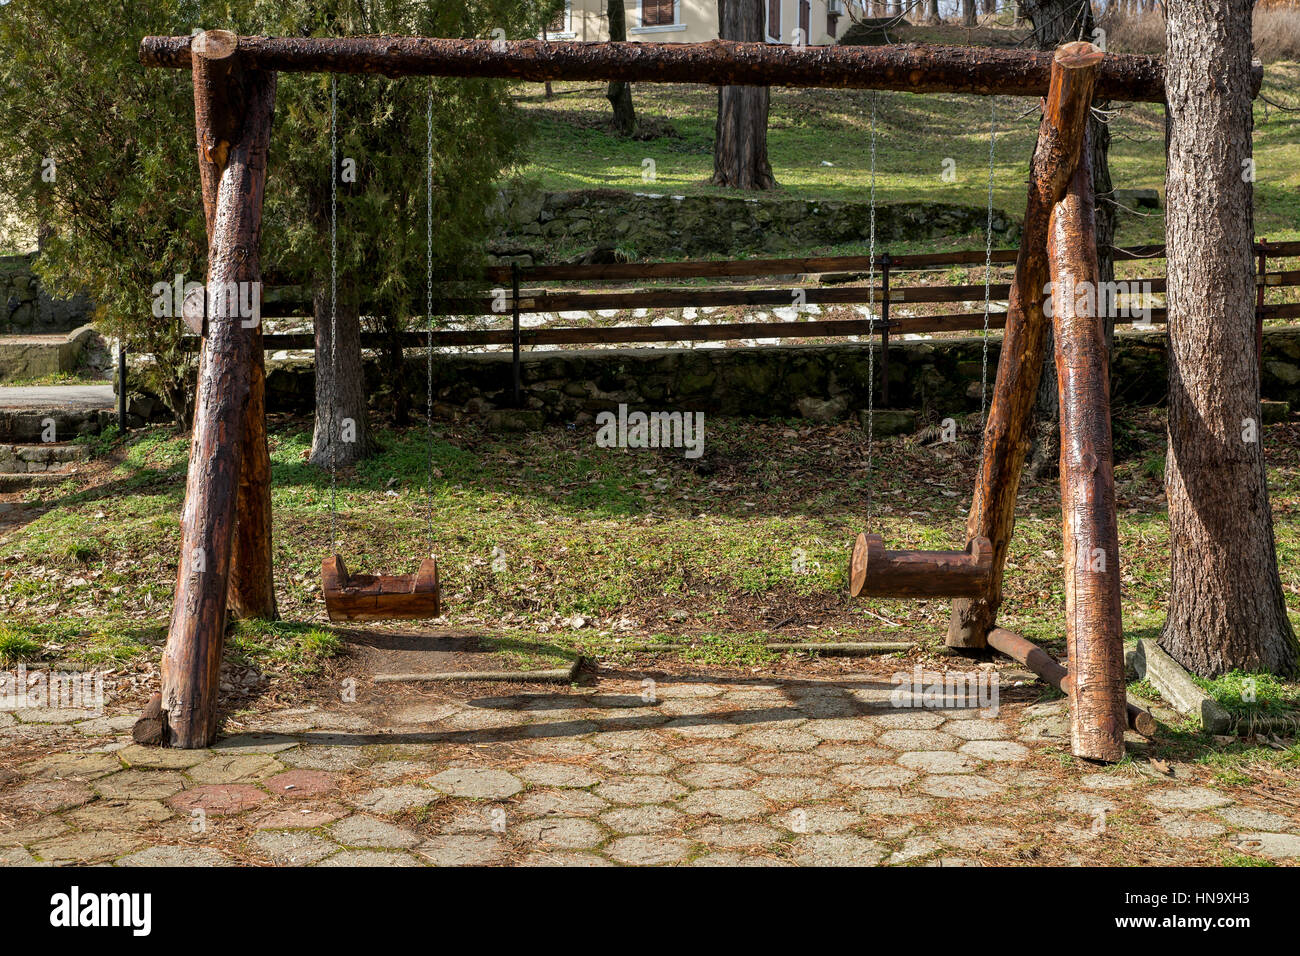 Swing made of tree trunks hung on chains Stock Photo